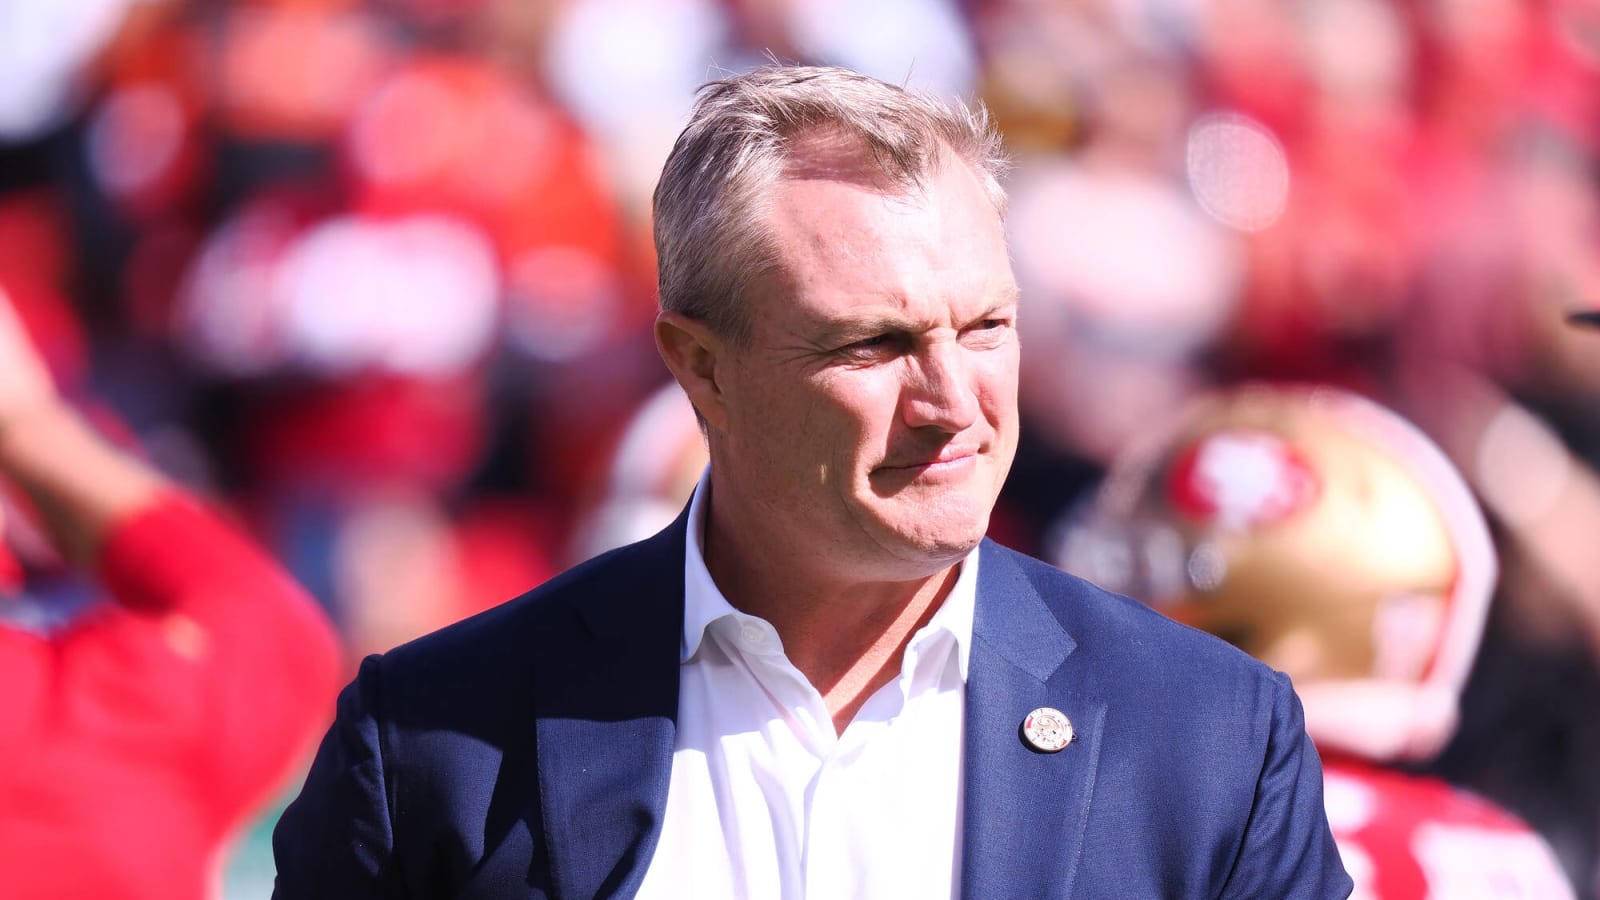 San Francisco 49ers Projected To Receive More 2025 Draft Picks